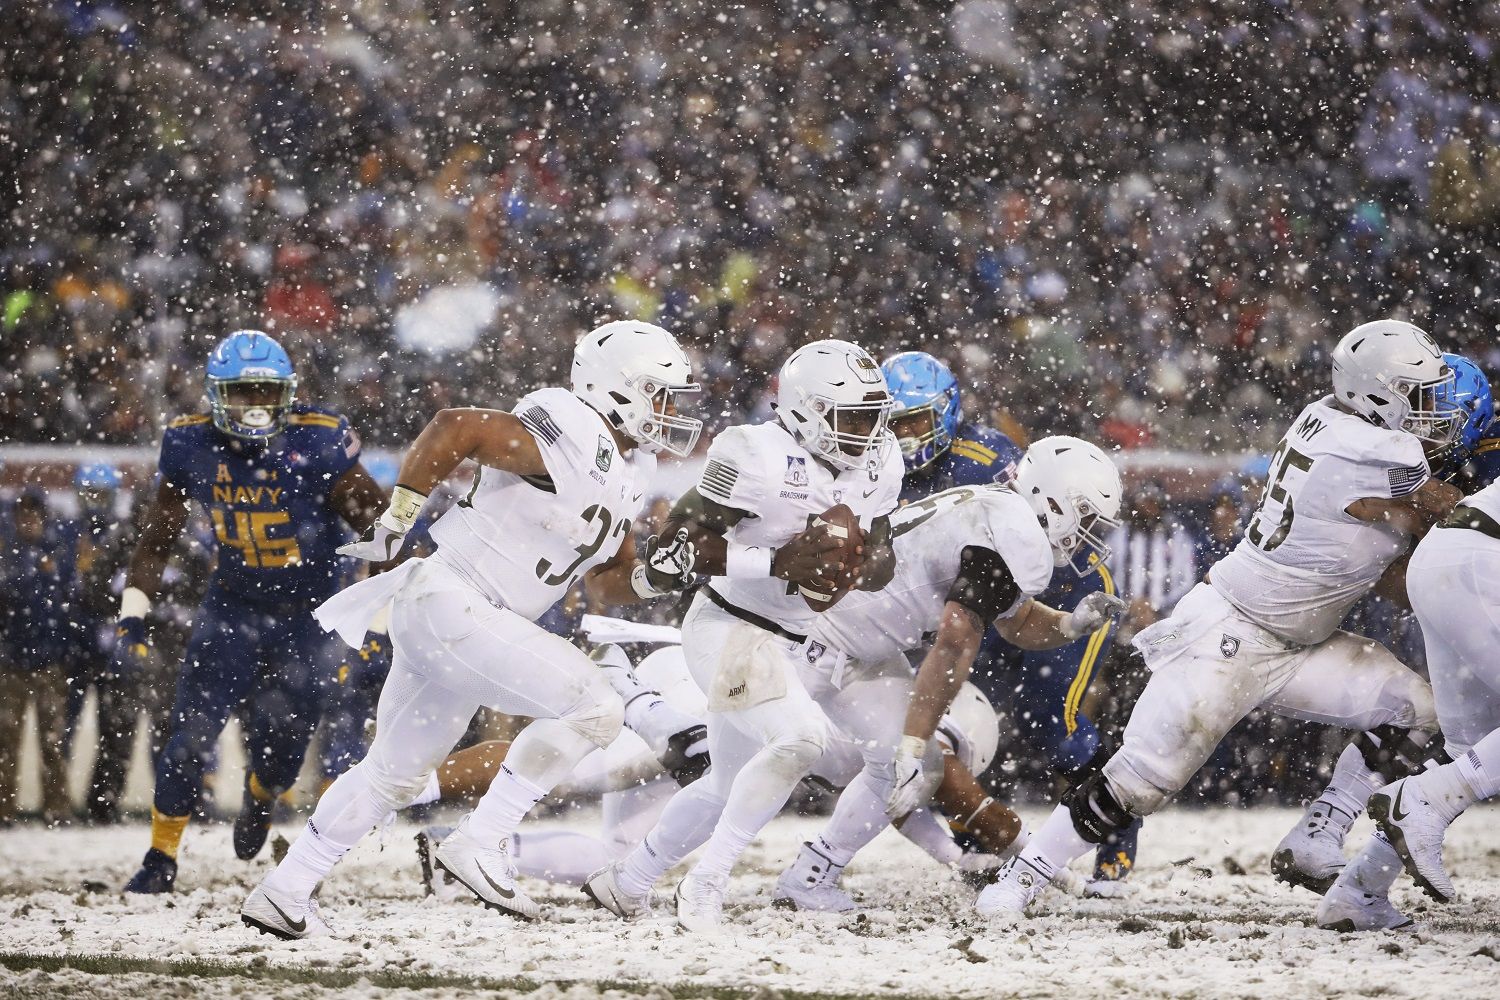 Army's Ahmad Bradshaw, center, during the first half of an NCAA college football game against the Navy, Saturday, Dec. 9, 2017, in Philadelphia. (AP Photo/Matt Rourke)